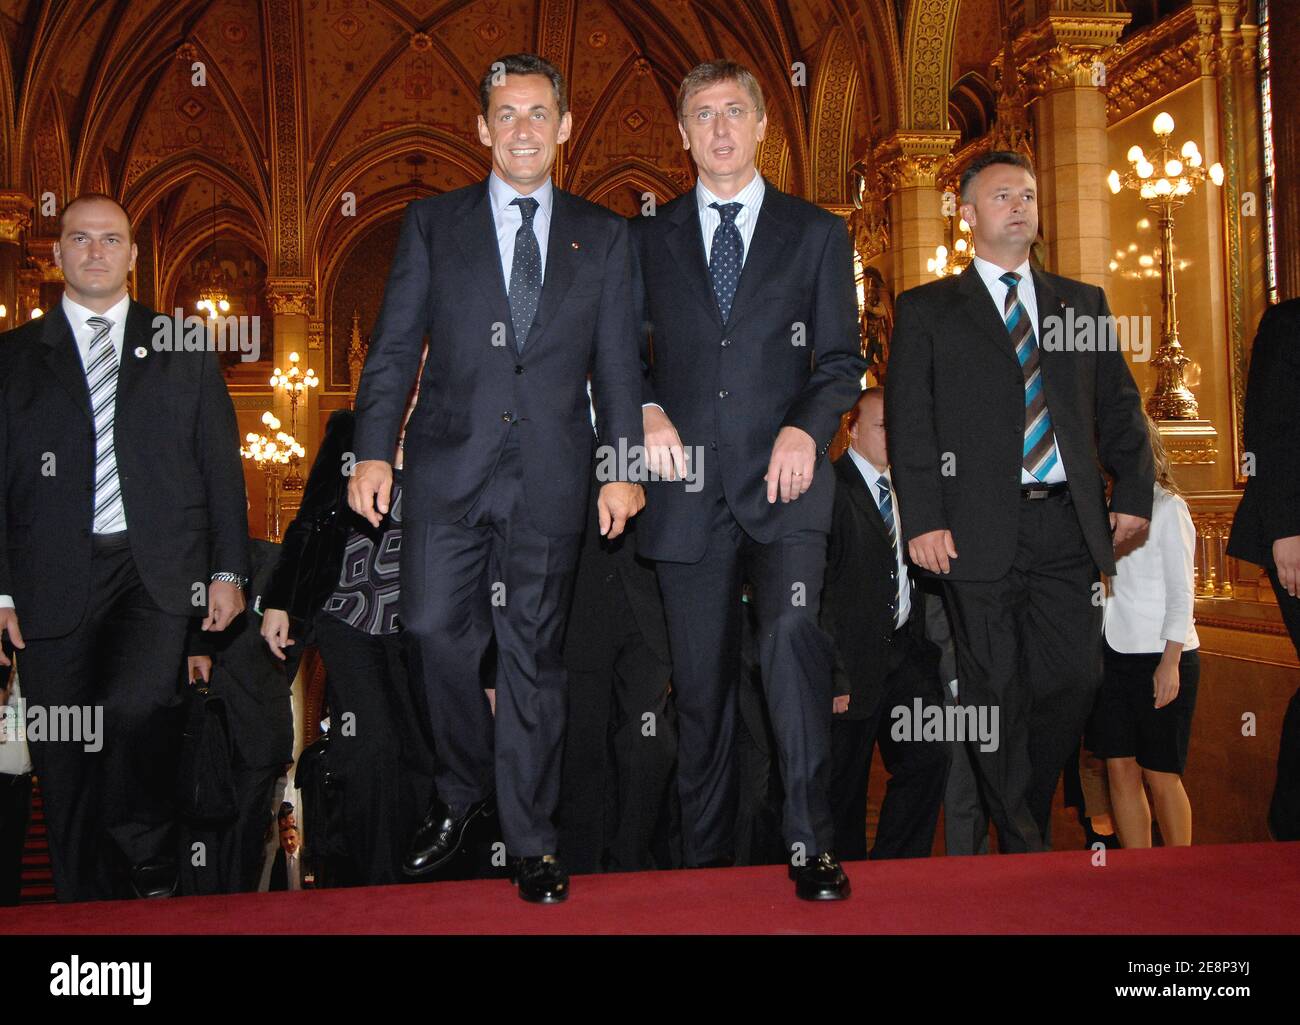 Hungarian Prime Minister Ferenc Gyurcsany escorts French President Nicolas Sarkozy in the building of the Parliament as part of his one-day official visit in Budapest, Hungary, on September 14, 2007. Photo by Christophe Guibbaud/ABACAPRESS.COM Stock Photo